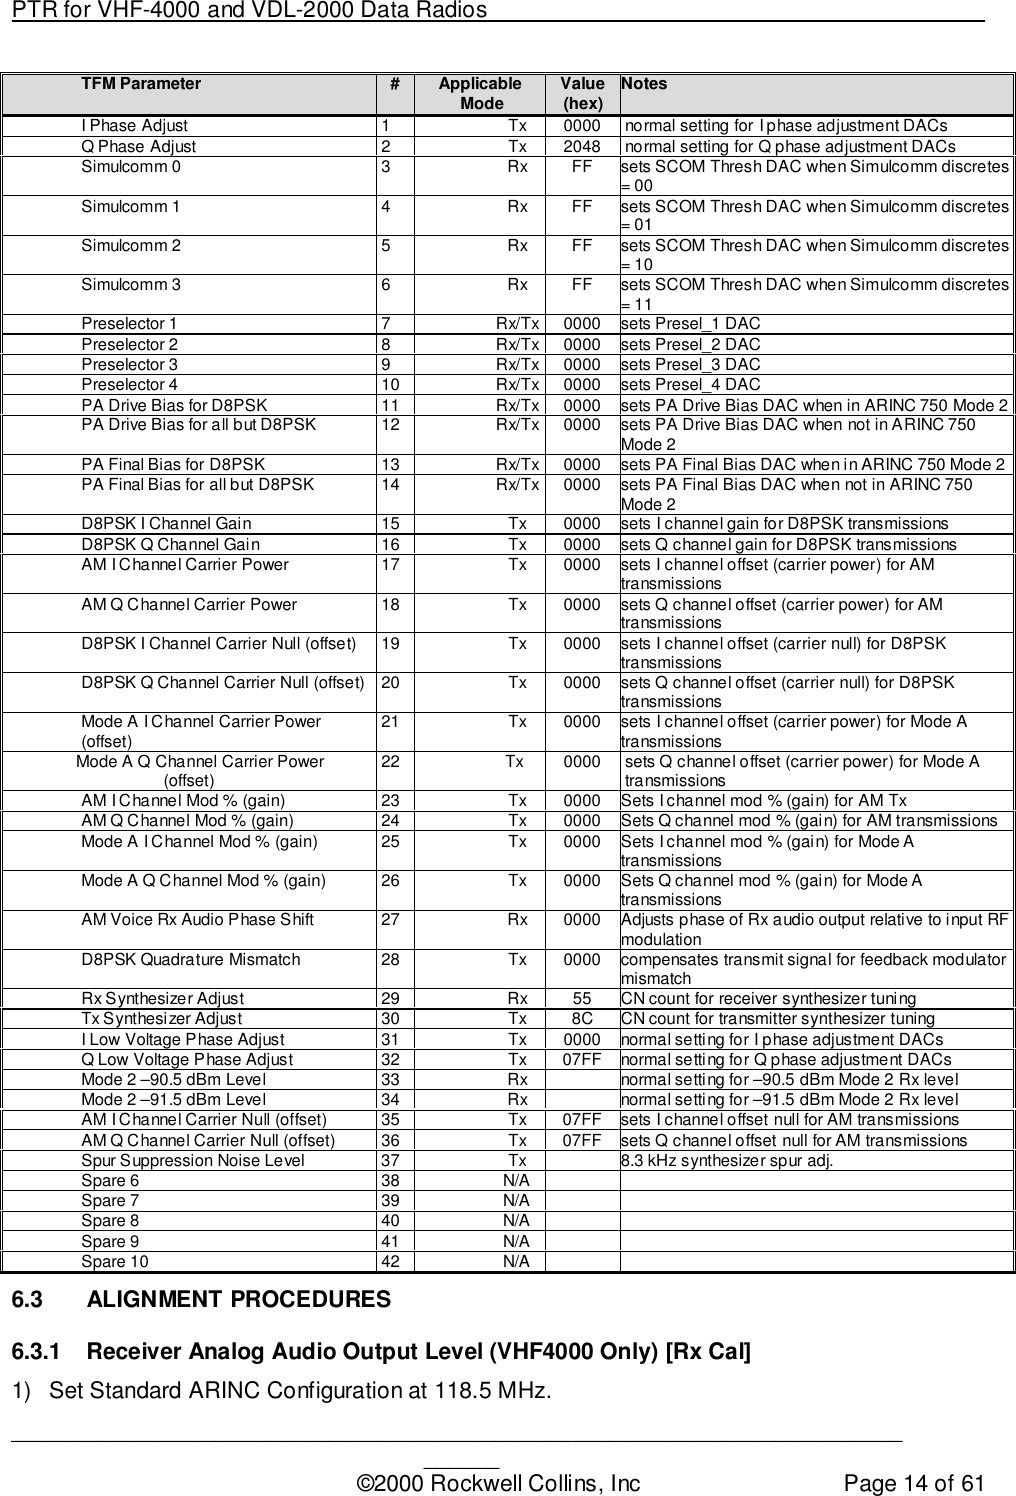 PTR for VHF-4000 and VDL-2000 Data Radios                                                                                ____________________________________________________________________________©2000 Rockwell Collins, Inc Page 14 of 61TFM Parameter #Applicable Mode Value(hex) NotesI Phase Adjust 1 Tx 0000  normal setting for I phase adjustment DACsQ Phase Adjust 2 Tx 2048  normal setting for Q phase adjustment DACsSimulcomm 0 3 Rx FF sets SCOM Thresh DAC when Simulcomm discretes= 00Simulcomm 1 4 Rx FF sets SCOM Thresh DAC when Simulcomm discretes= 01Simulcomm 2 5 Rx FF sets SCOM Thresh DAC when Simulcomm discretes= 10Simulcomm 3 6 Rx FF sets SCOM Thresh DAC when Simulcomm discretes= 11Preselector 1 7 Rx/Tx 0000 sets Presel_1 DACPreselector 2 8 Rx/Tx 0000 sets Presel_2 DACPreselector 3 9 Rx/Tx 0000 sets Presel_3 DACPreselector 4 10 Rx/Tx 0000 sets Presel_4 DACPA Drive Bias for D8PSK 11 Rx/Tx 0000 sets PA Drive Bias DAC when in ARINC 750 Mode 2PA Drive Bias for all but D8PSK 12 Rx/Tx 0000 sets PA Drive Bias DAC when not in ARINC 750Mode 2PA Final Bias for D8PSK 13 Rx/Tx 0000 sets PA Final Bias DAC when in ARINC 750 Mode 2PA Final Bias for all but D8PSK 14 Rx/Tx 0000 sets PA Final Bias DAC when not in ARINC 750Mode 2D8PSK I Channel Gain 15 Tx 0000 sets I channel gain for D8PSK transmissionsD8PSK Q Channel Gain 16 Tx 0000 sets Q channel gain for D8PSK transmissionsAM I Channel Carrier Power 17 Tx 0000 sets I channel offset (carrier power) for AMtransmissionsAM Q Channel Carrier Power 18 Tx 0000 sets Q channel offset (carrier power) for AMtransmissionsD8PSK I Channel Carrier Null (offset) 19 Tx 0000 sets I channel offset (carrier null) for D8PSKtransmissionsD8PSK Q Channel Carrier Null (offset) 20 Tx 0000 sets Q channel offset (carrier null) for D8PSKtransmissionsMode A I Channel Carrier Power(offset) 21 Tx 0000 sets I channel offset (carrier power) for Mode Atransmissions     Mode A Q Channel Carrier Power(offset) 22                Tx 0000 sets Q channel offset (carrier power) for Mode AtransmissionsAM I Channel Mod % (gain) 23 Tx 0000 Sets I channel mod % (gain) for AM TxAM Q Channel Mod % (gain) 24 Tx 0000 Sets Q channel mod % (gain) for AM transmissionsMode A I Channel Mod % (gain) 25 Tx 0000 Sets I channel mod % (gain) for Mode AtransmissionsMode A Q Channel Mod % (gain) 26 Tx 0000 Sets Q channel mod % (gain) for Mode AtransmissionsAM Voice Rx Audio Phase Shift 27 Rx 0000 Adjusts phase of Rx audio output relative to input RFmodulationD8PSK Quadrature Mismatch 28 Tx 0000 compensates transmit signal for feedback modulatormismatchRx Synthesizer Adjust 29 Rx 55 CN count for receiver synthesizer tuningTx Synthesizer Adjust 30 Tx 8C CN count for transmitter synthesizer tuningI Low Voltage Phase Adjust 31 Tx 0000 normal setting for I phase adjustment DACsQ Low Voltage Phase Adjust 32 Tx 07FF normal setting for Q phase adjustment DACsMode 2 –90.5 dBm Level 33 Rx normal setting for –90.5 dBm Mode 2 Rx levelMode 2 –91.5 dBm Level 34 Rx normal setting for –91.5 dBm Mode 2 Rx levelAM I Channel Carrier Null (offset) 35 Tx 07FF sets I channel offset null for AM transmissionsAM Q Channel Carrier Null (offset) 36 Tx 07FF sets Q channel offset null for AM transmissionsSpur Suppression Noise Level 37 Tx 8.3 kHz synthesizer spur adj.Spare 6 38 N/ASpare 7 39 N/ASpare 8 40 N/ASpare 9 41 N/ASpare 10 42 N/A6.3 ALIGNMENT PROCEDURES6.3.1  Receiver Analog Audio Output Level (VHF4000 Only) [Rx Cal]1)  Set Standard ARINC Configuration at 118.5 MHz.